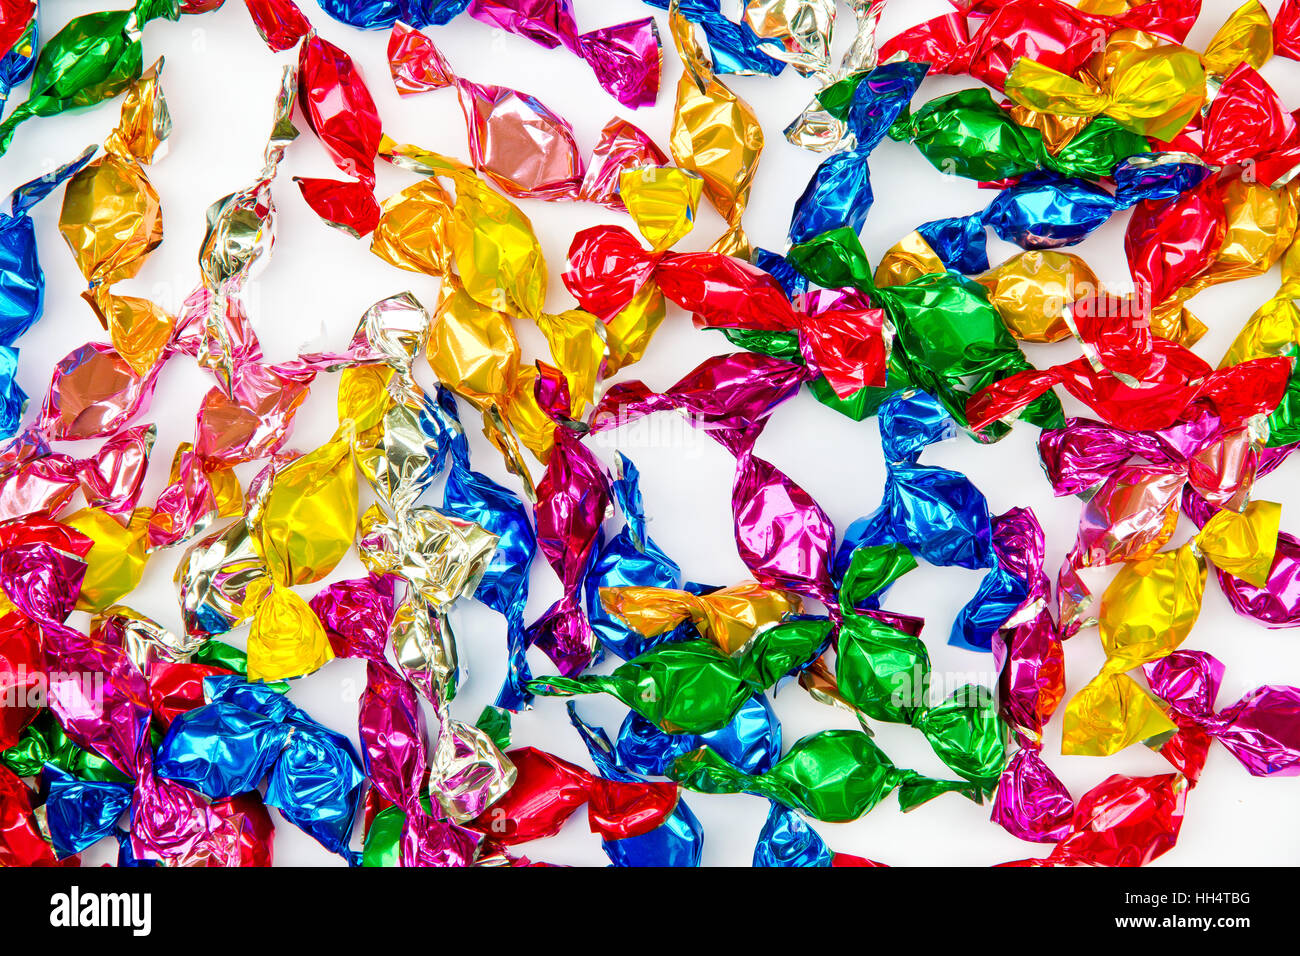 Background with colorful bonbons Stock Photo